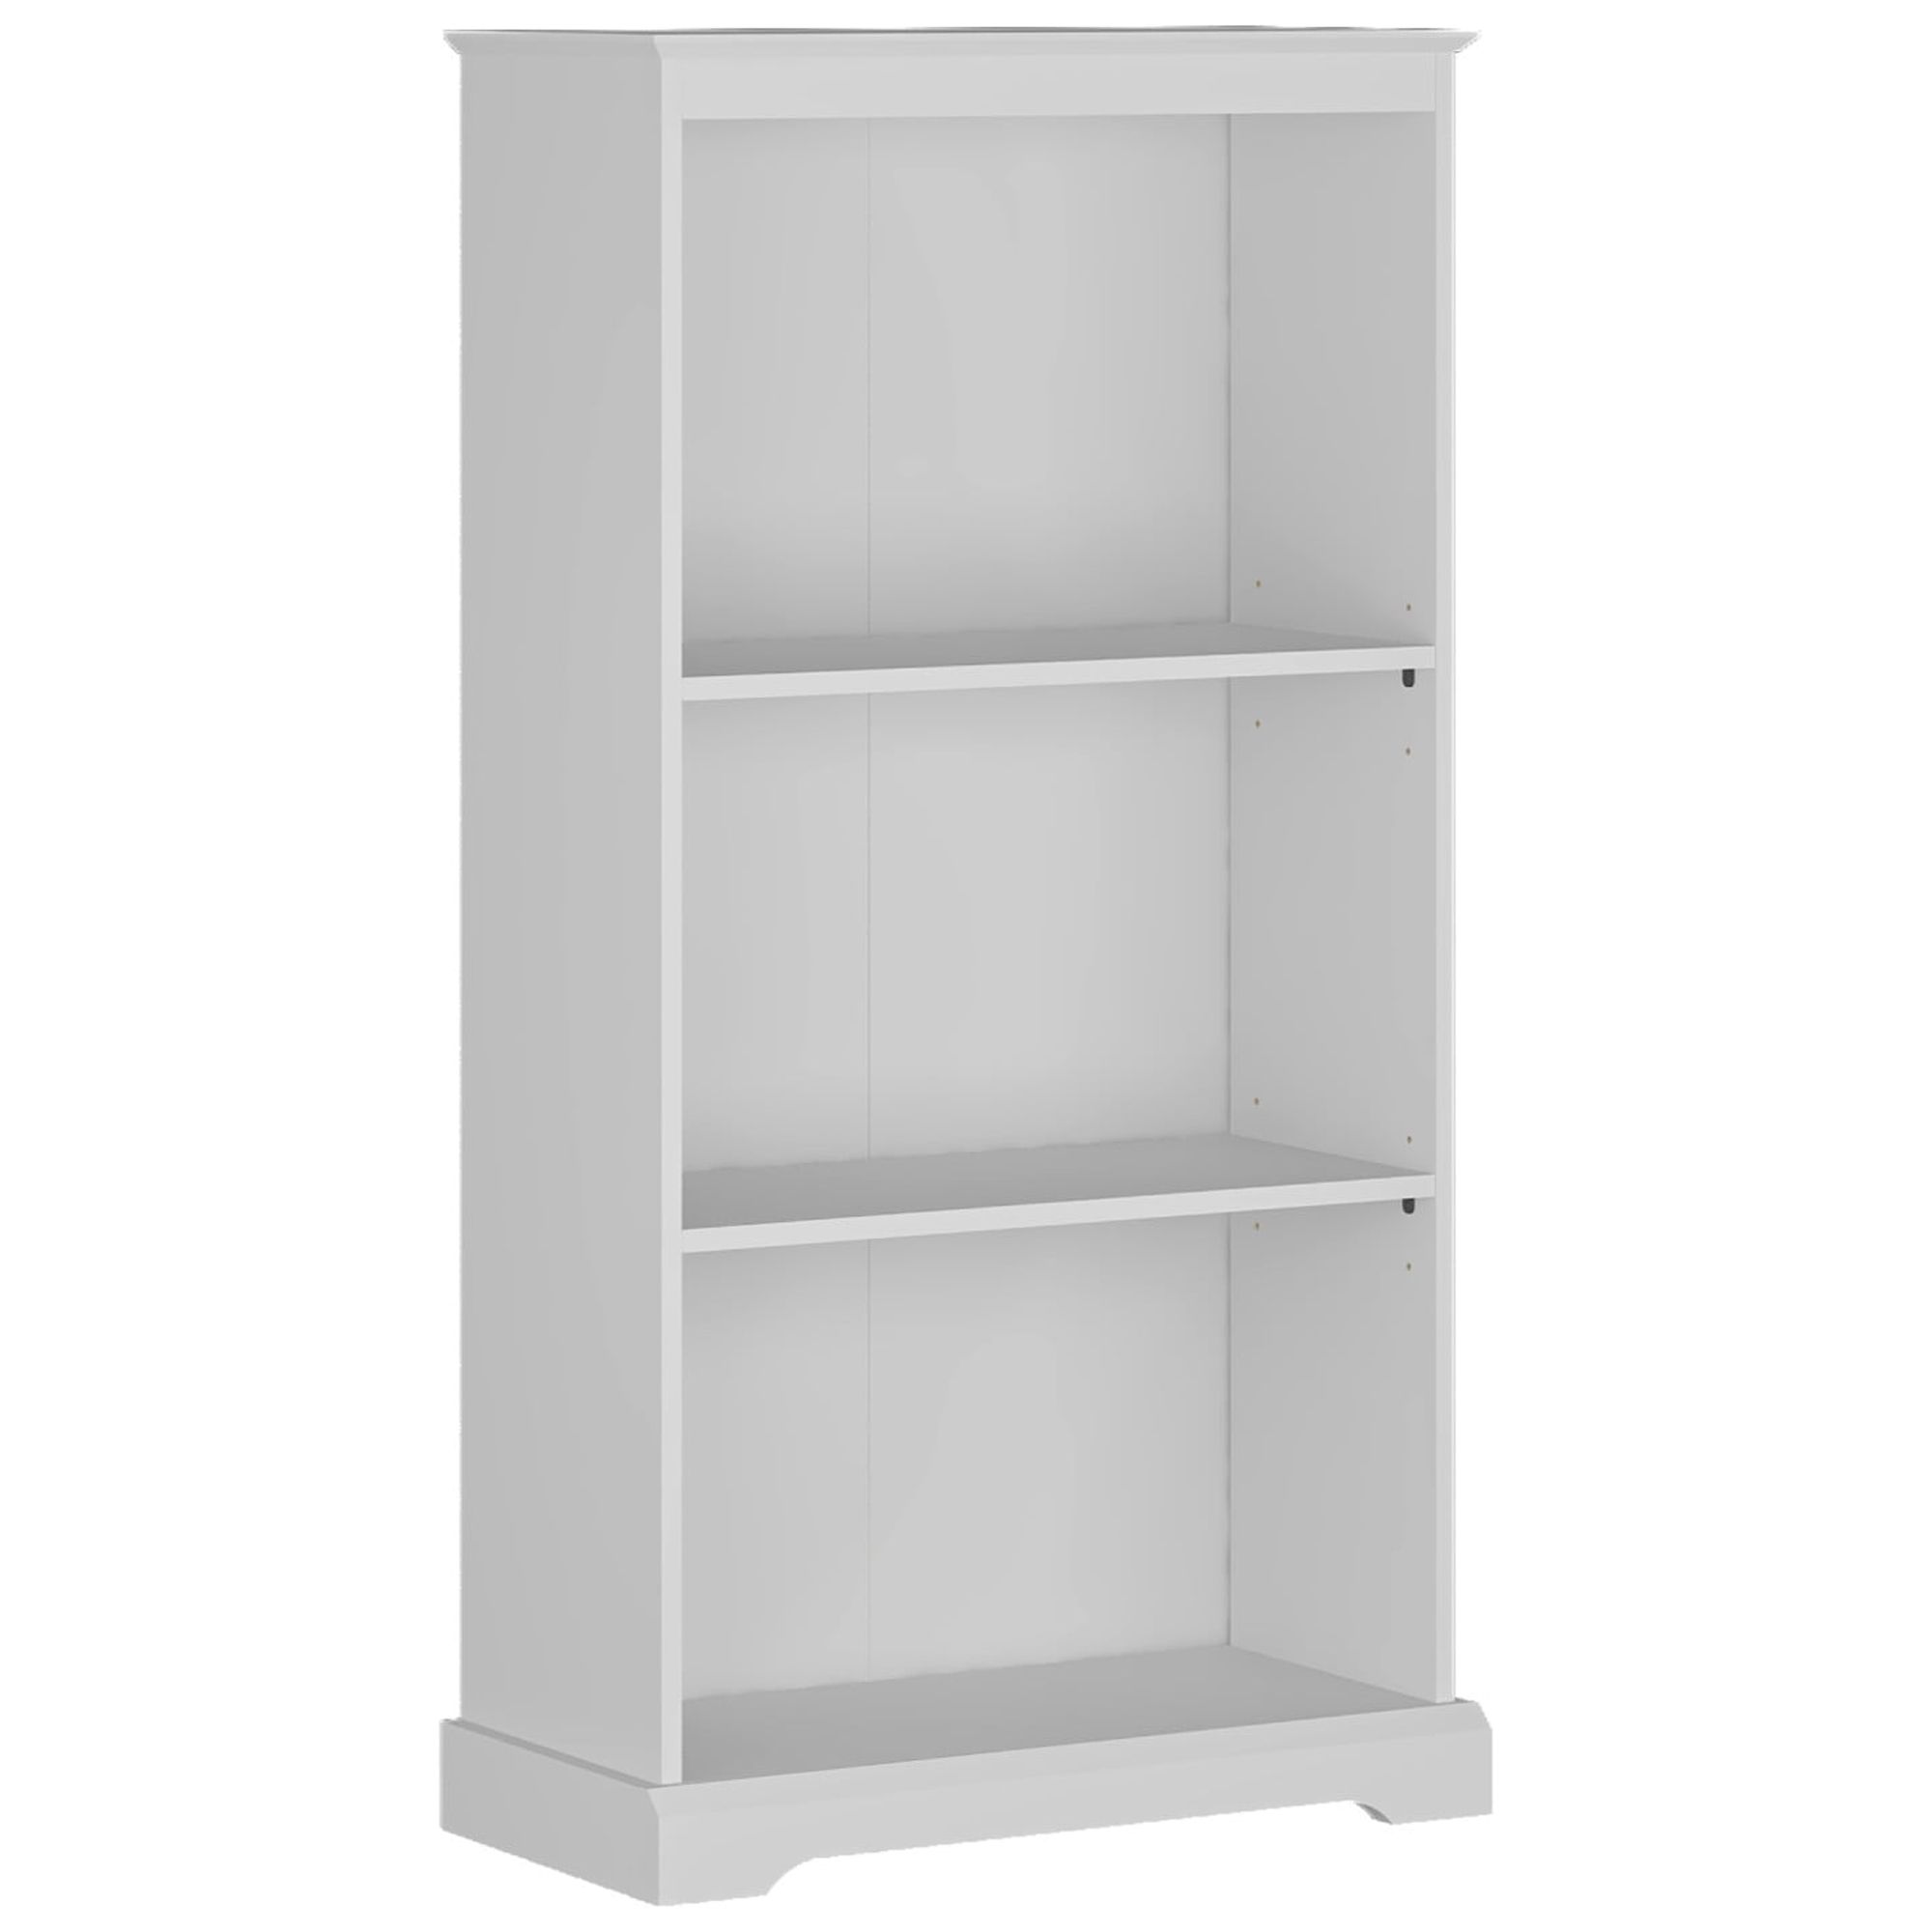 Hillsdale Campbell Wood 3 Shelf Kids Bookcase, White - image 2 of 11